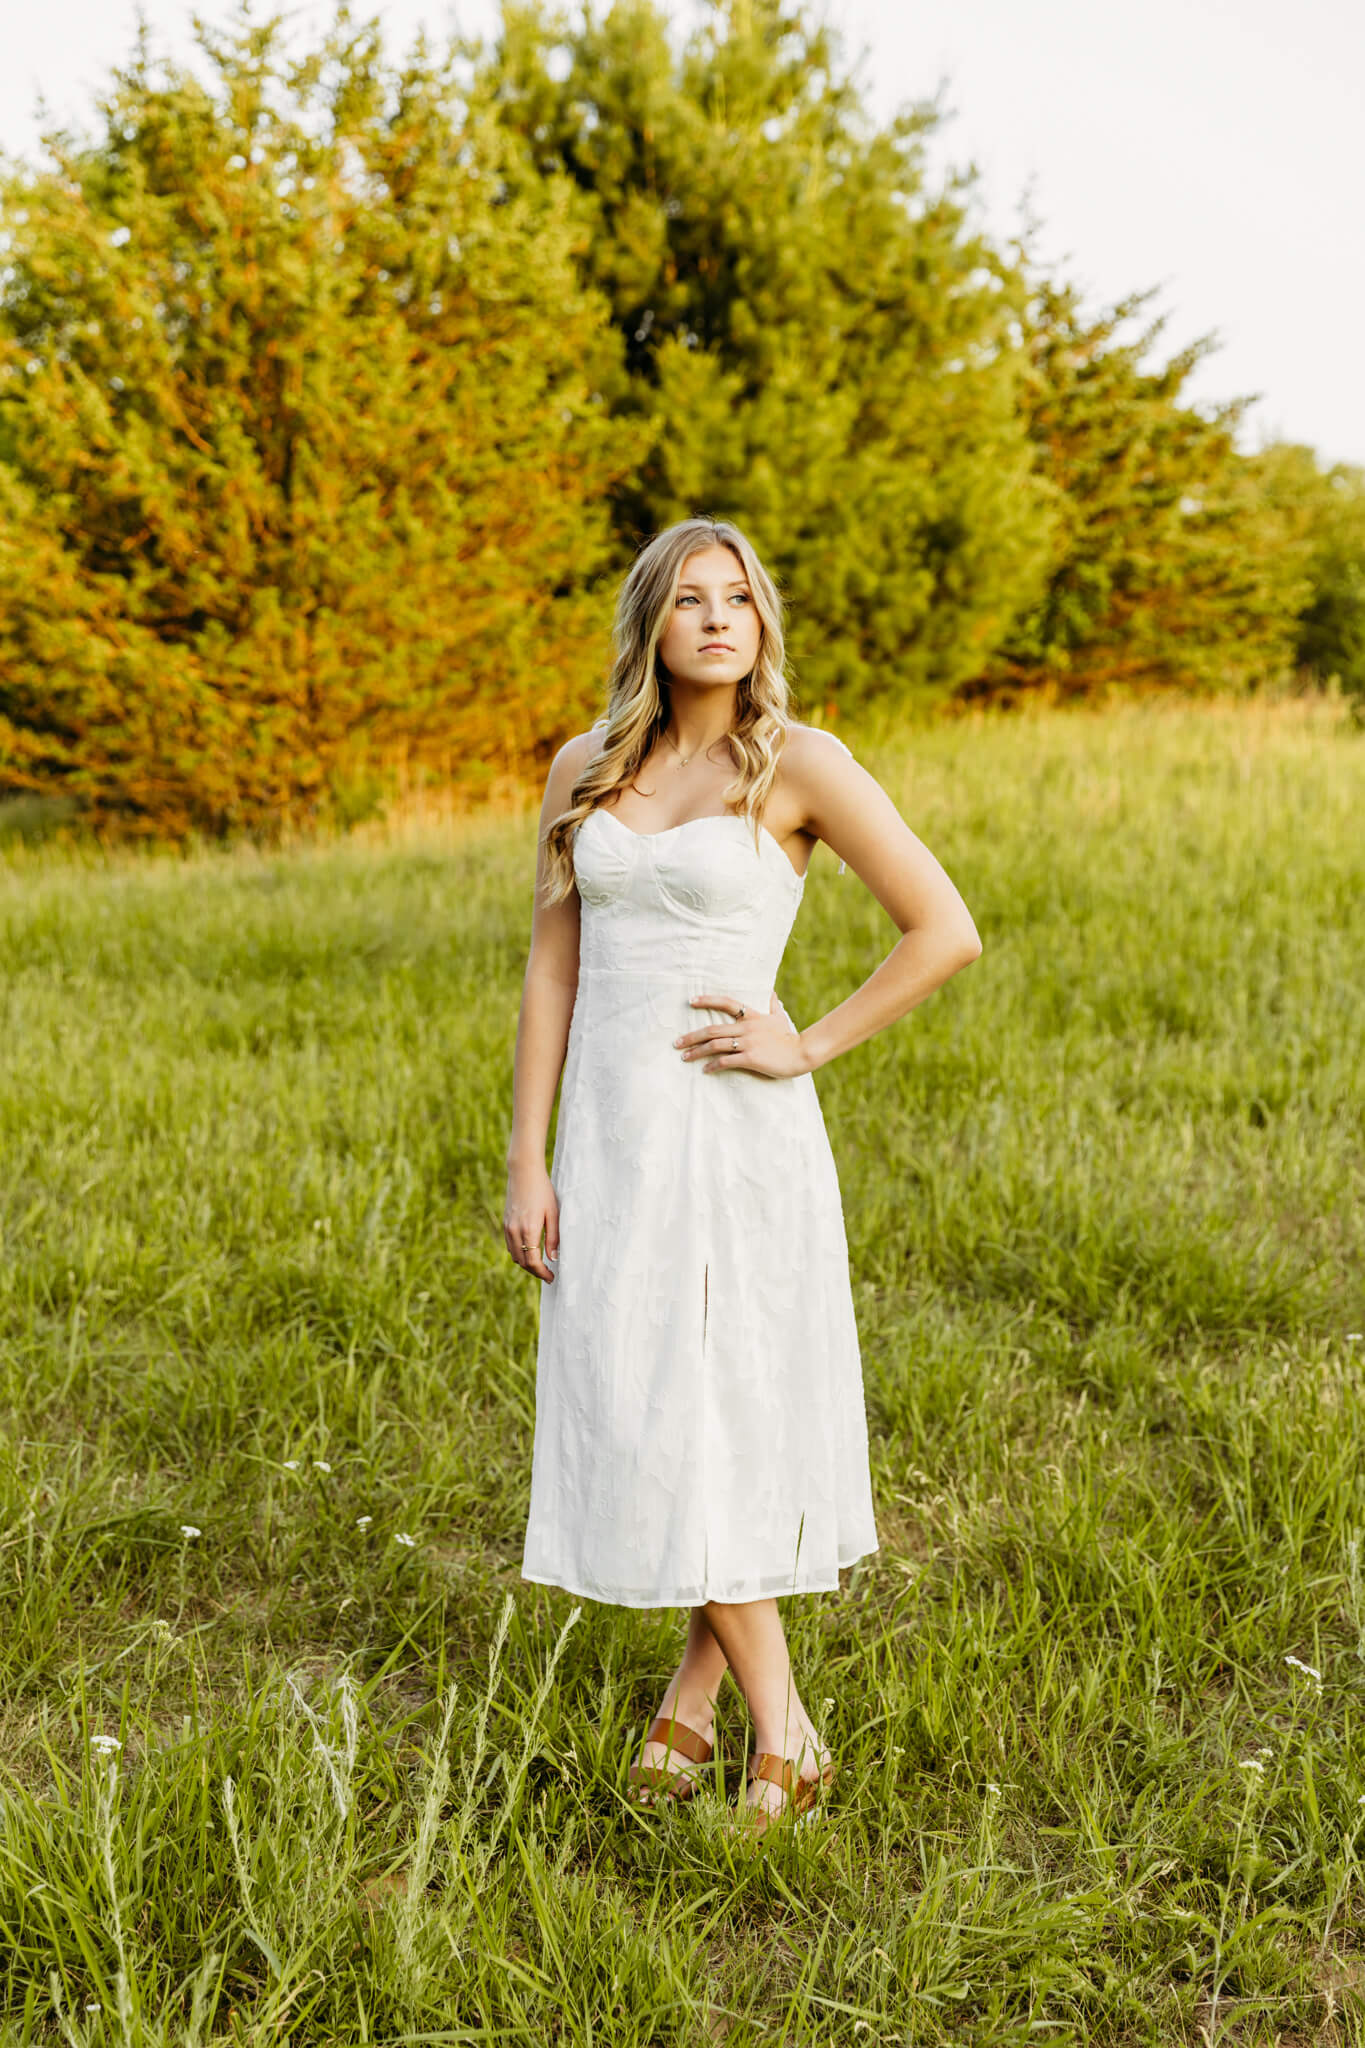 teen girl standing with hand on her hip in a white dress in a field at sunset